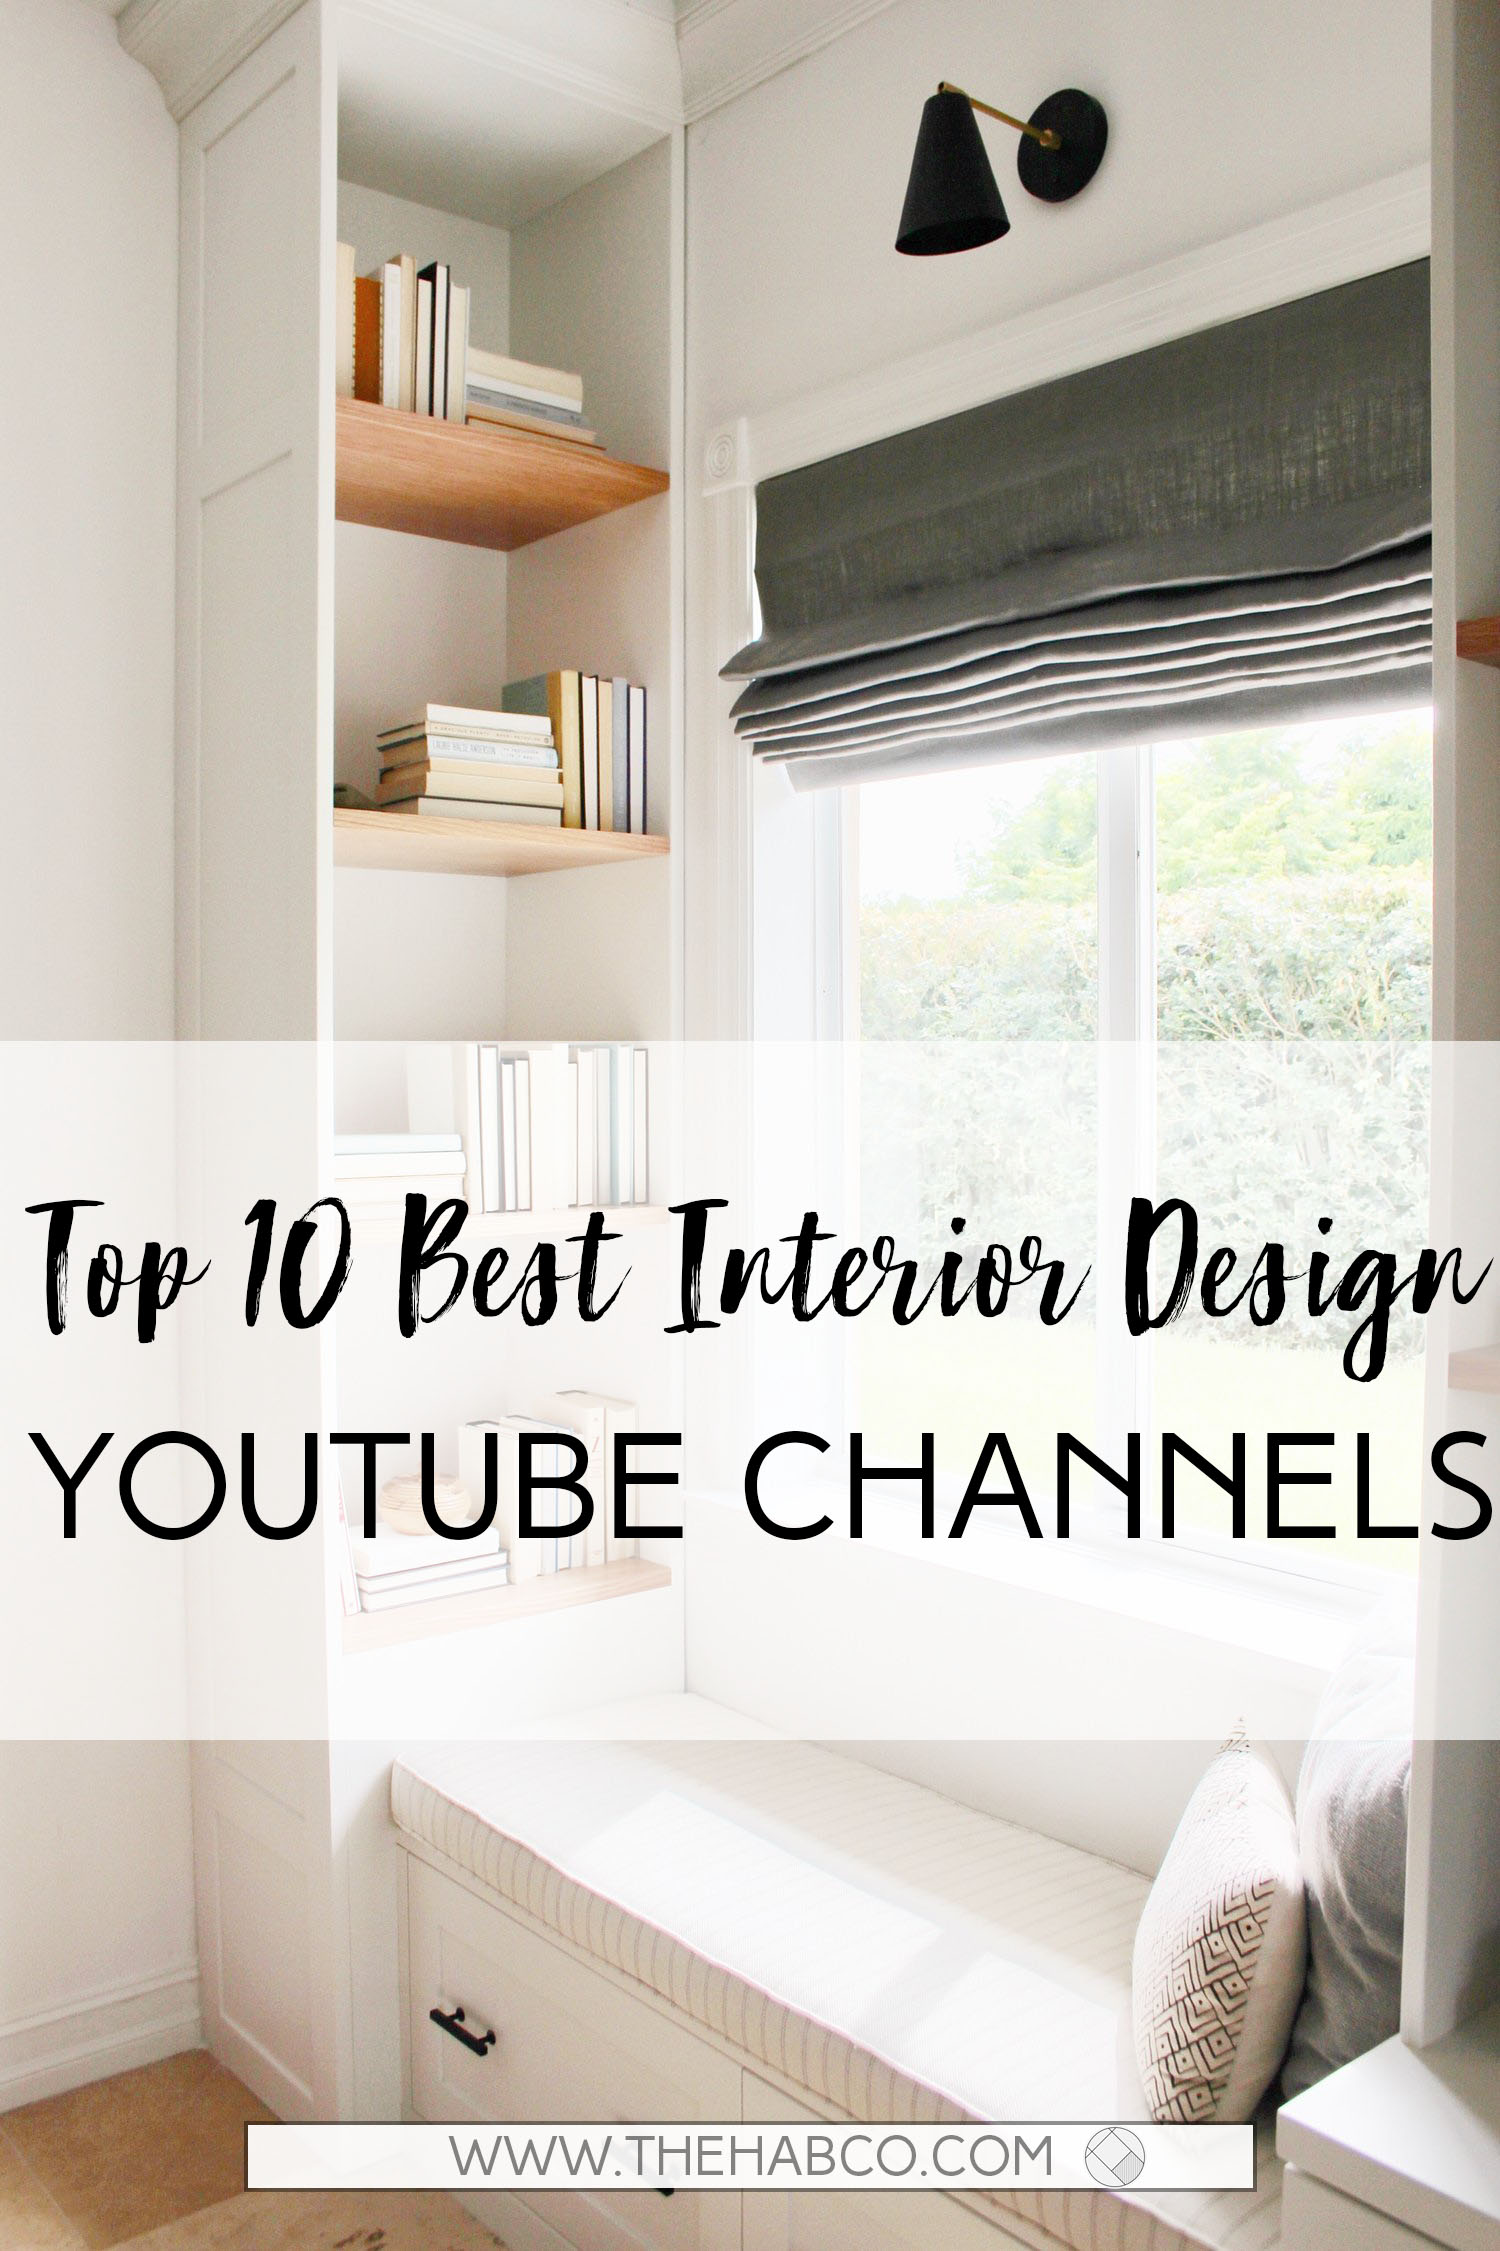 Top 10 Best Interior Design YouTube Channels — The Habitat Collective